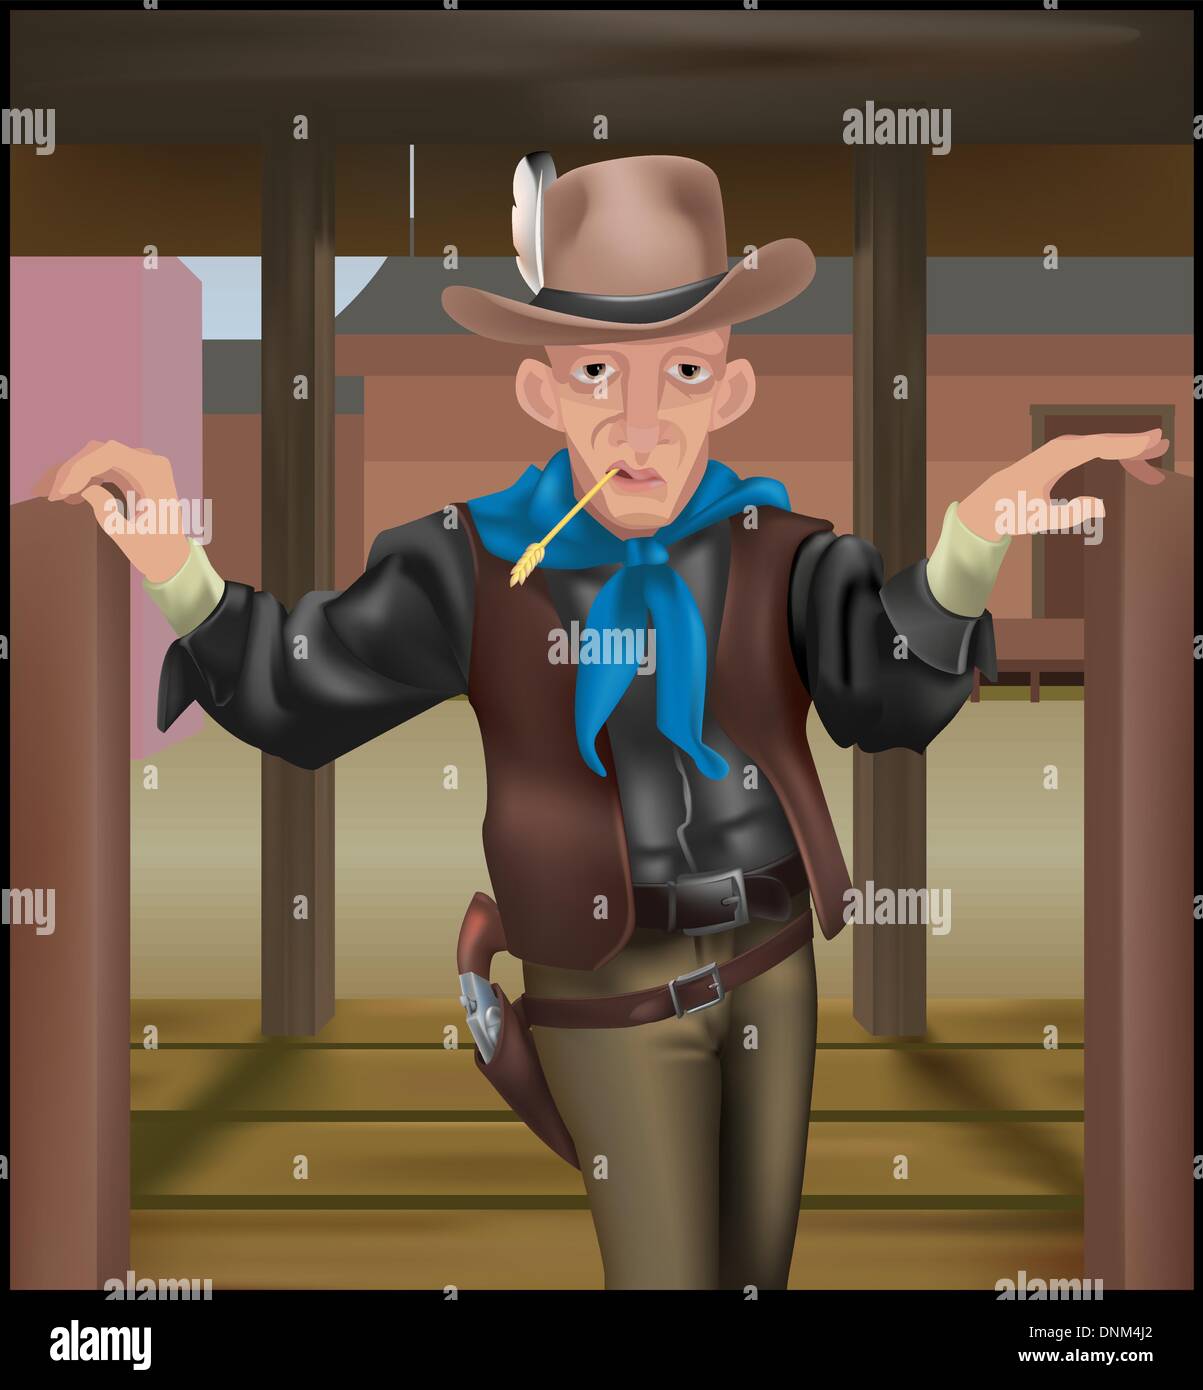 A cowboy coming through some swing doors. Clothing and gun make extensive use of gradient meshs. Stock Vector